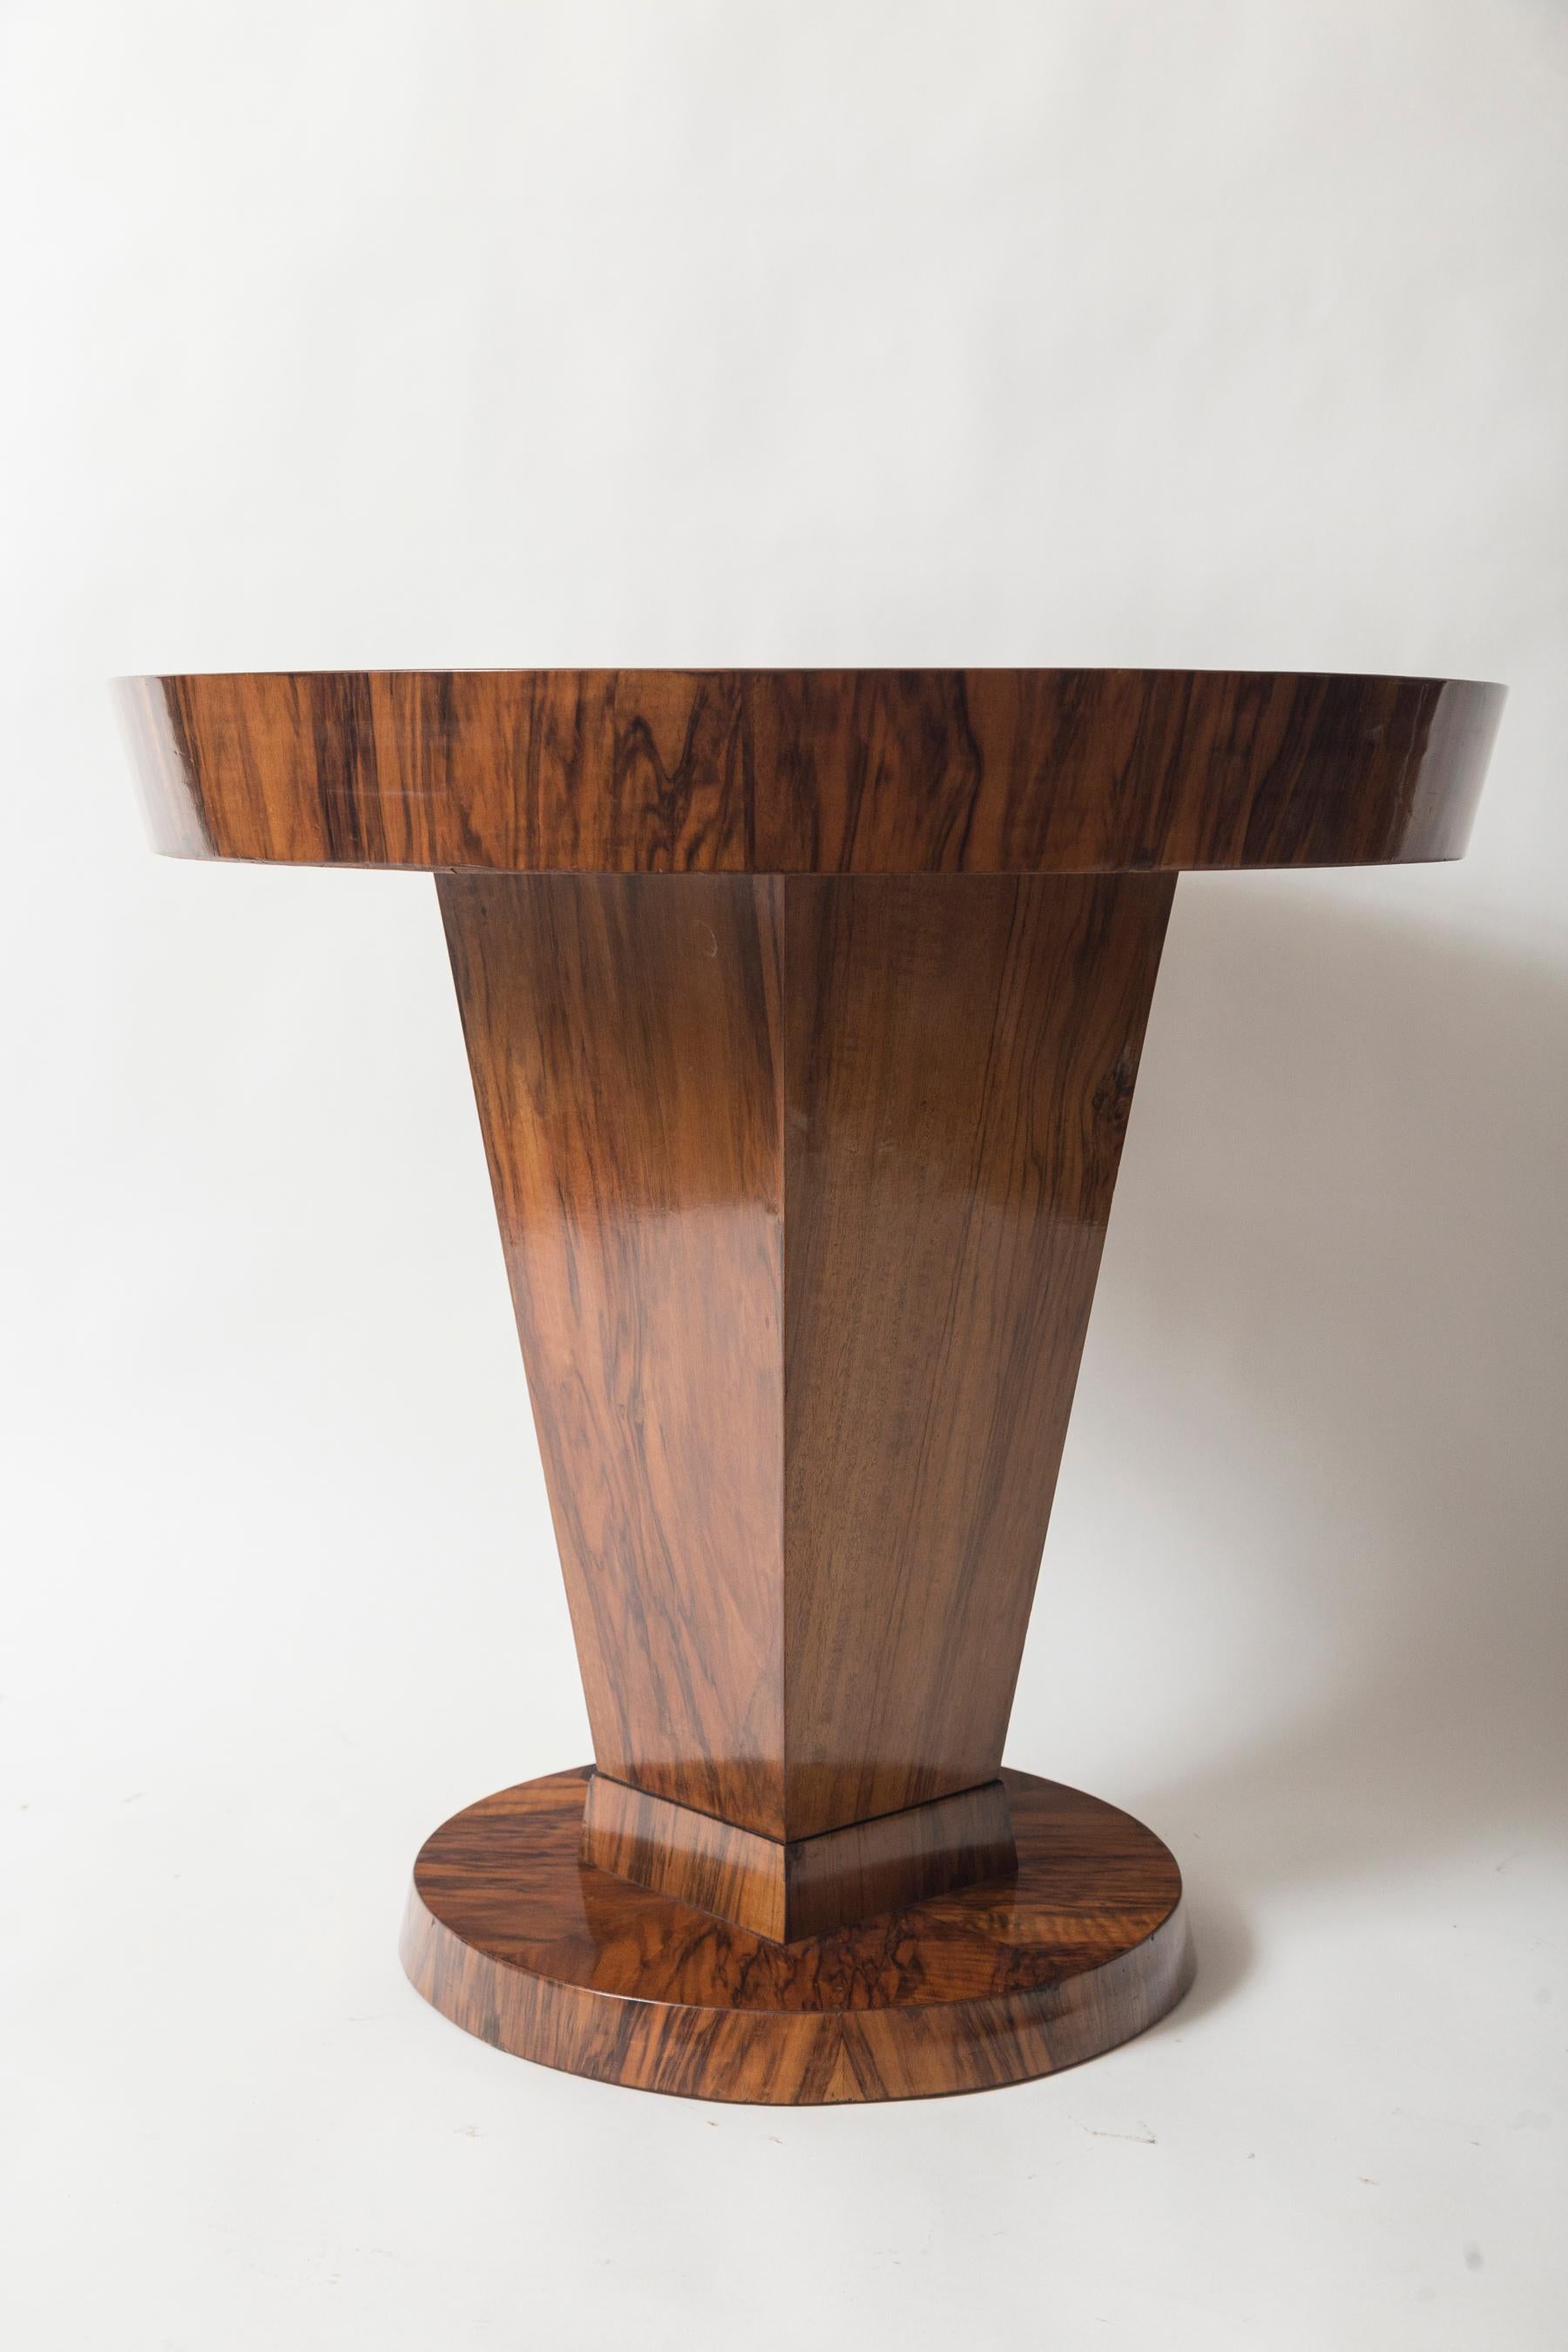 Circular table with deep 3.5? angled plateau edge finishing on a squared and tapered column in a beautiful walnut veneer on oak
Origin: Northern Italy
Dating: 1920ca
Condition: Very good
Dimensions: 27.5? diameter, 26.5? high.